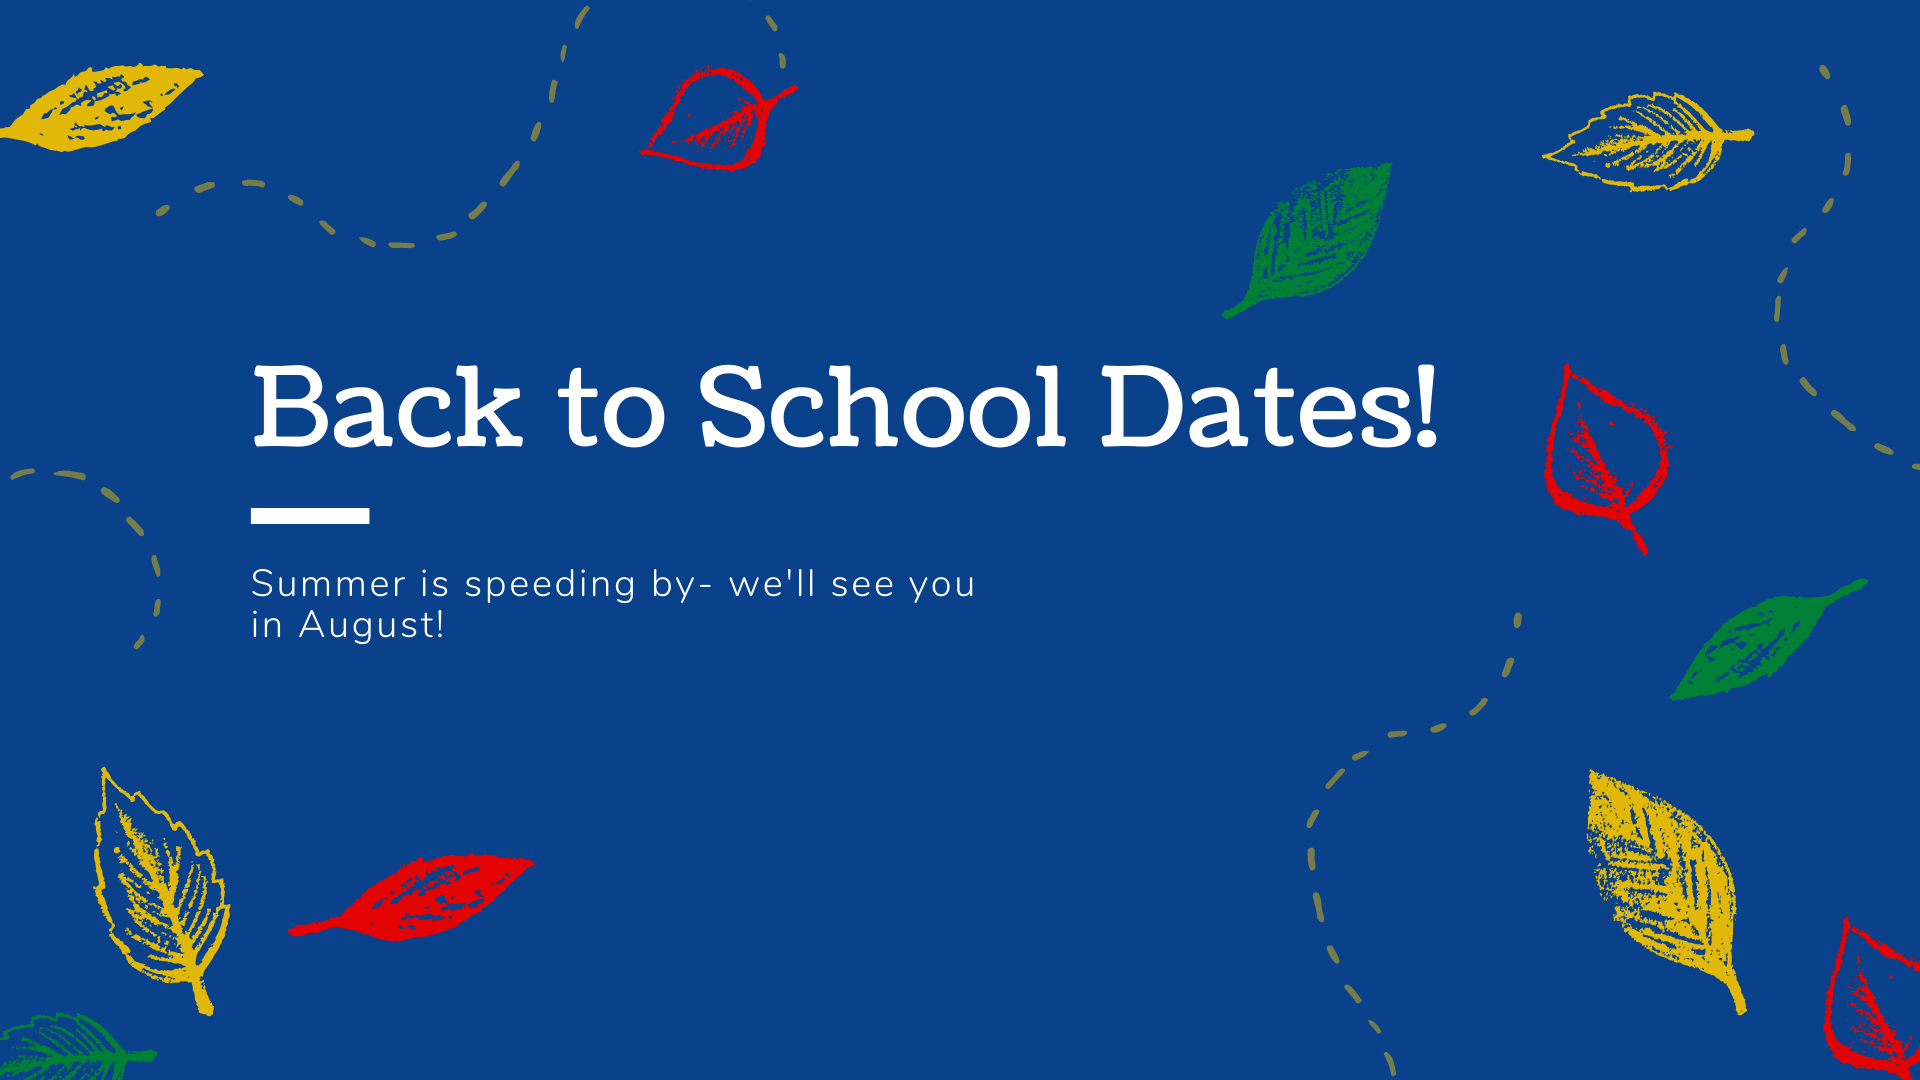 August back to school dates